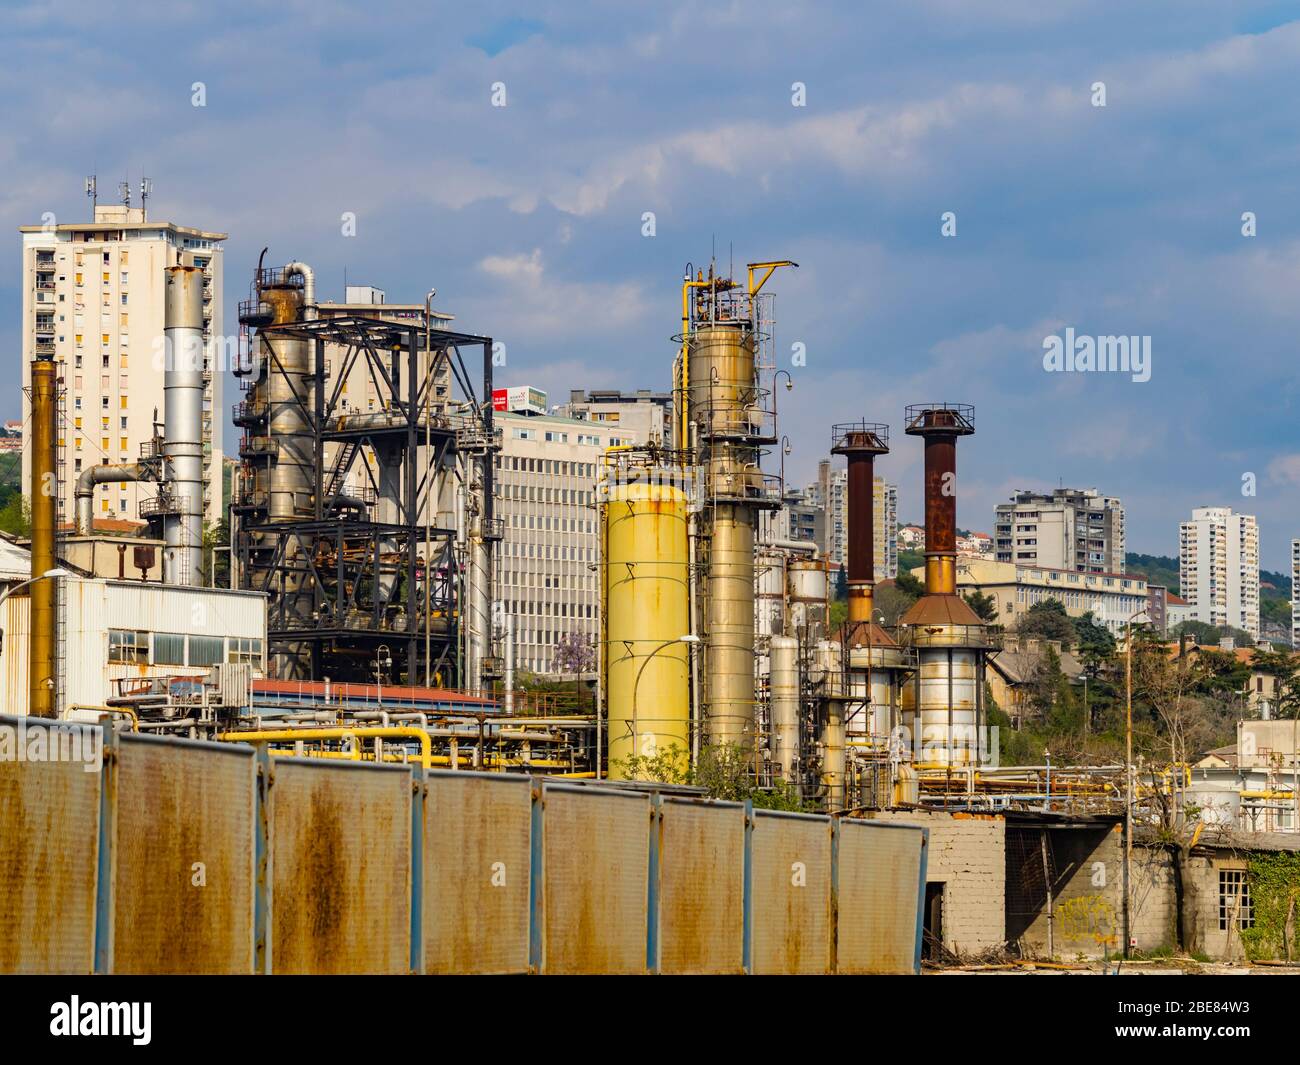 INA Mlaka largely abandoned elderly oil-refinery facility technology before town buildings skyscrapers in Rijeka Croatia Stock Photo